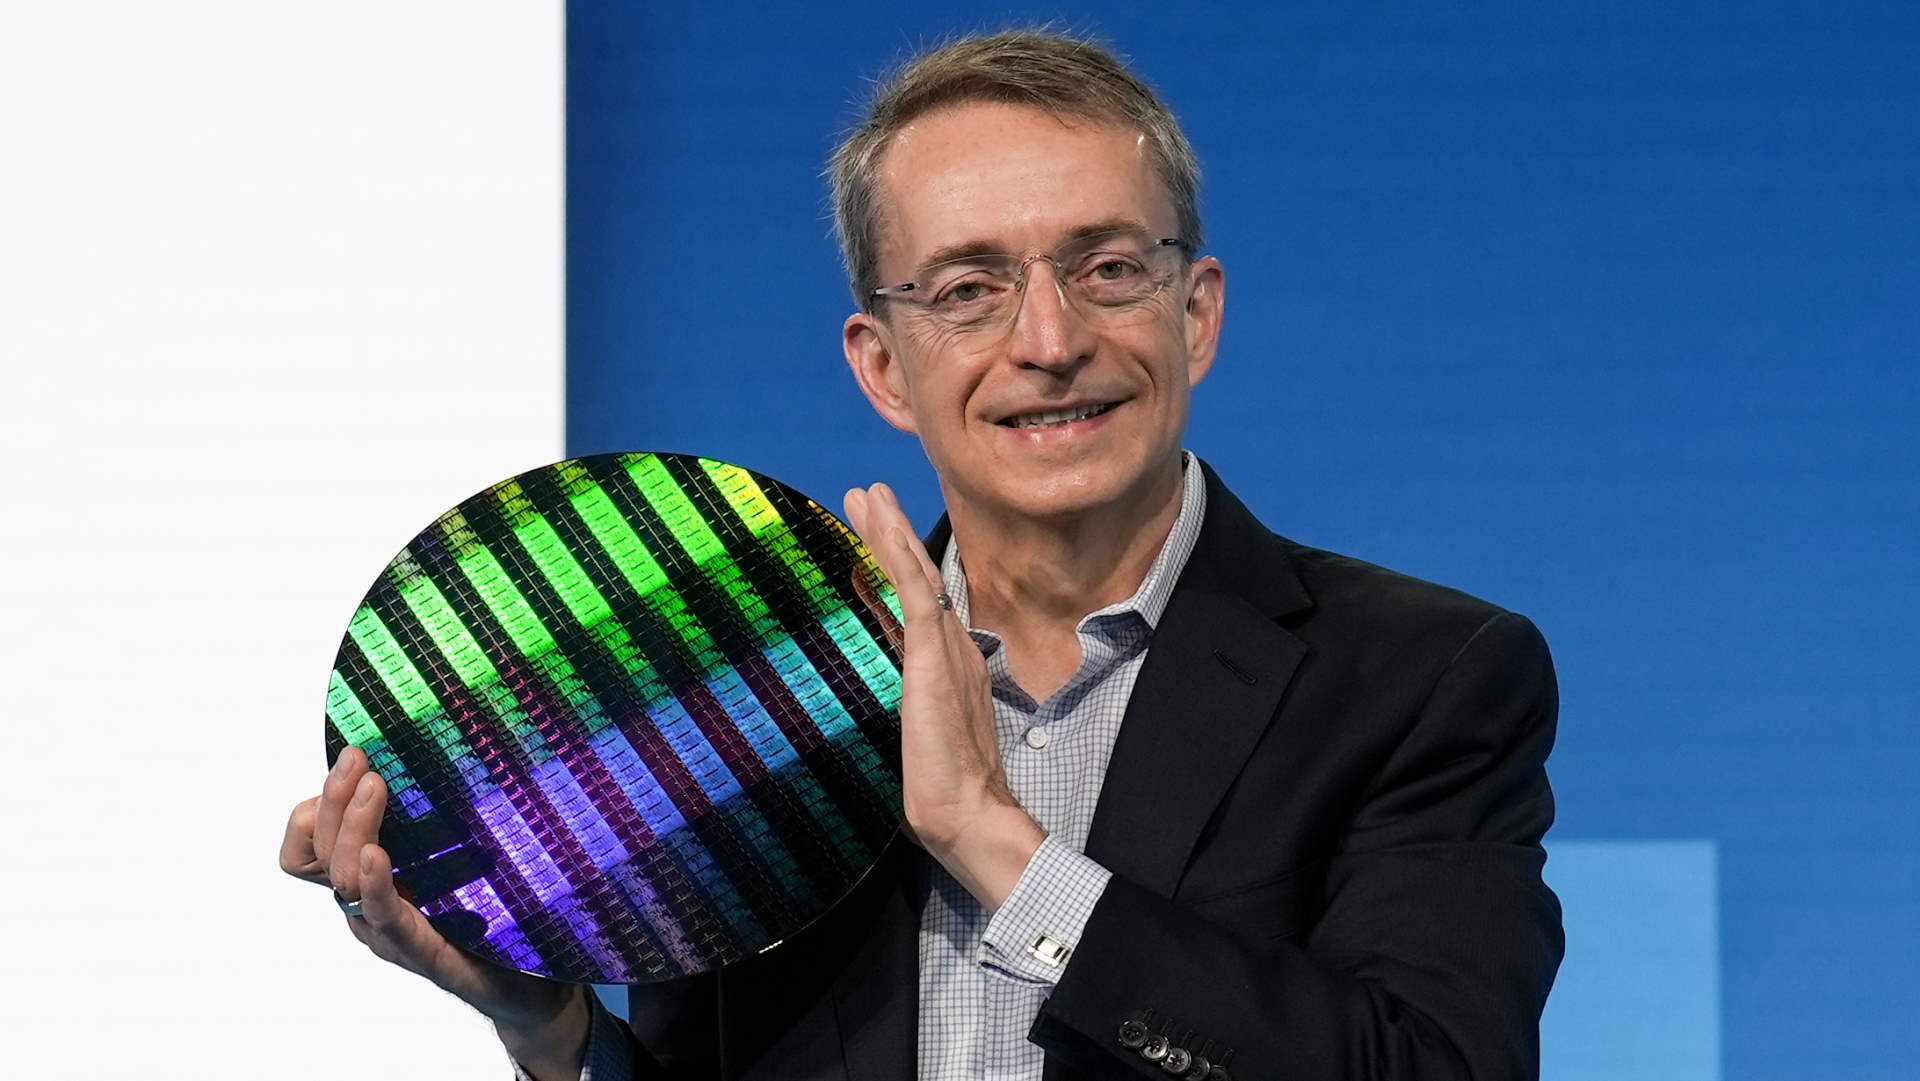  Will Intel kill its GPU business? I doubt it but I also don't like the odds 